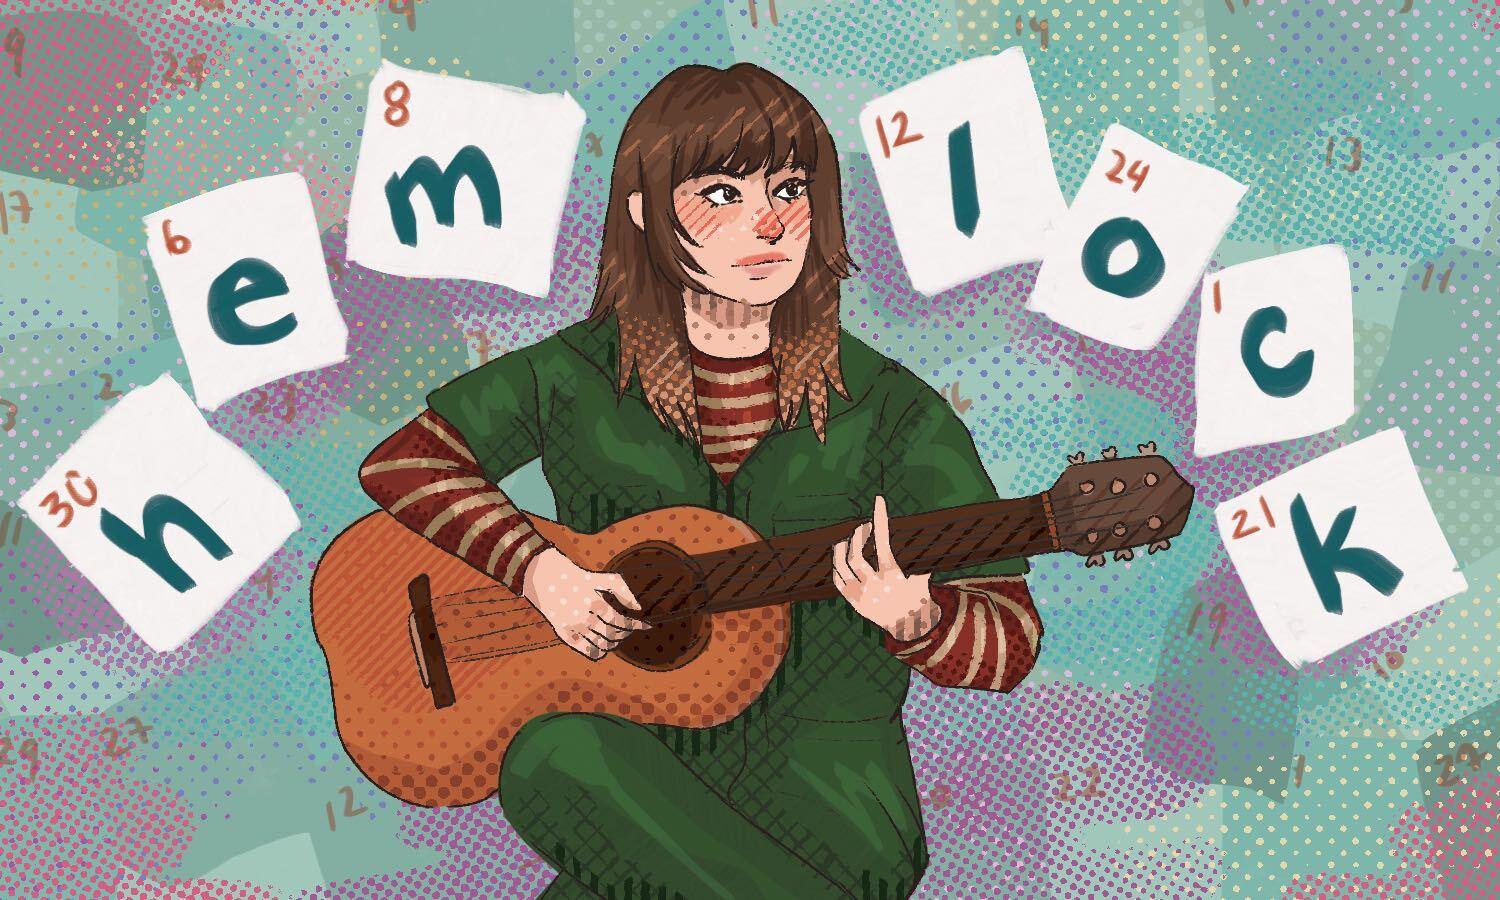 graphic illustration of a figure holding a guitar with the word Hemlock on calendar cards